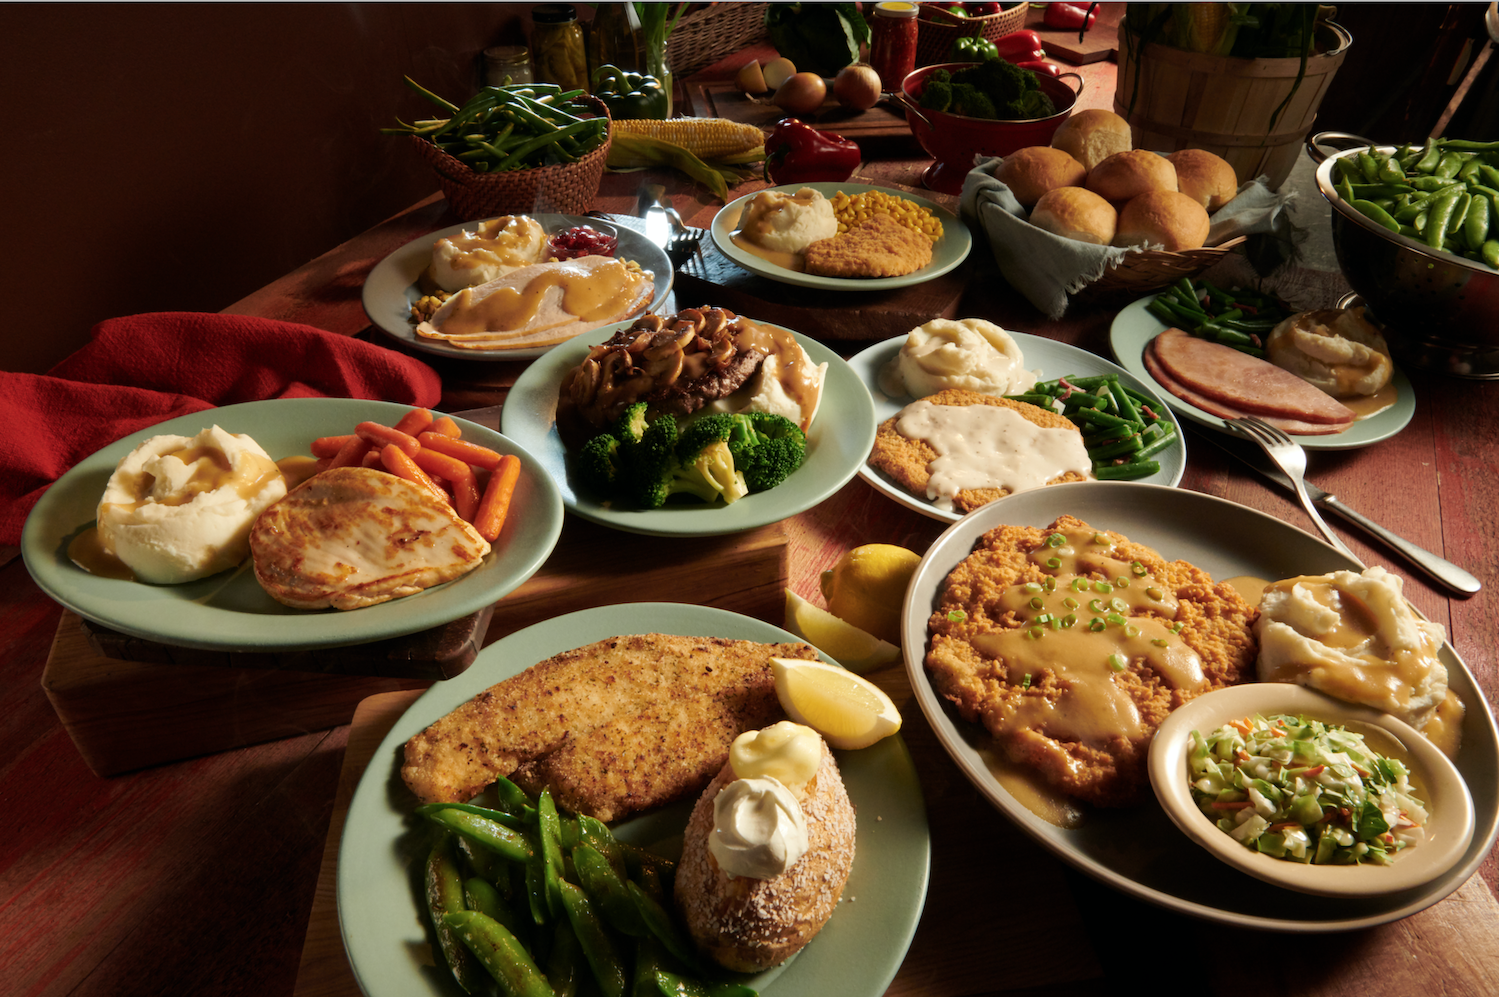 The eight Dinner Bell Plate entrées, now available for only $7.99, were carefully chosen for quality and variety, and consist of guest-favorites, as well as two brand new dishes.